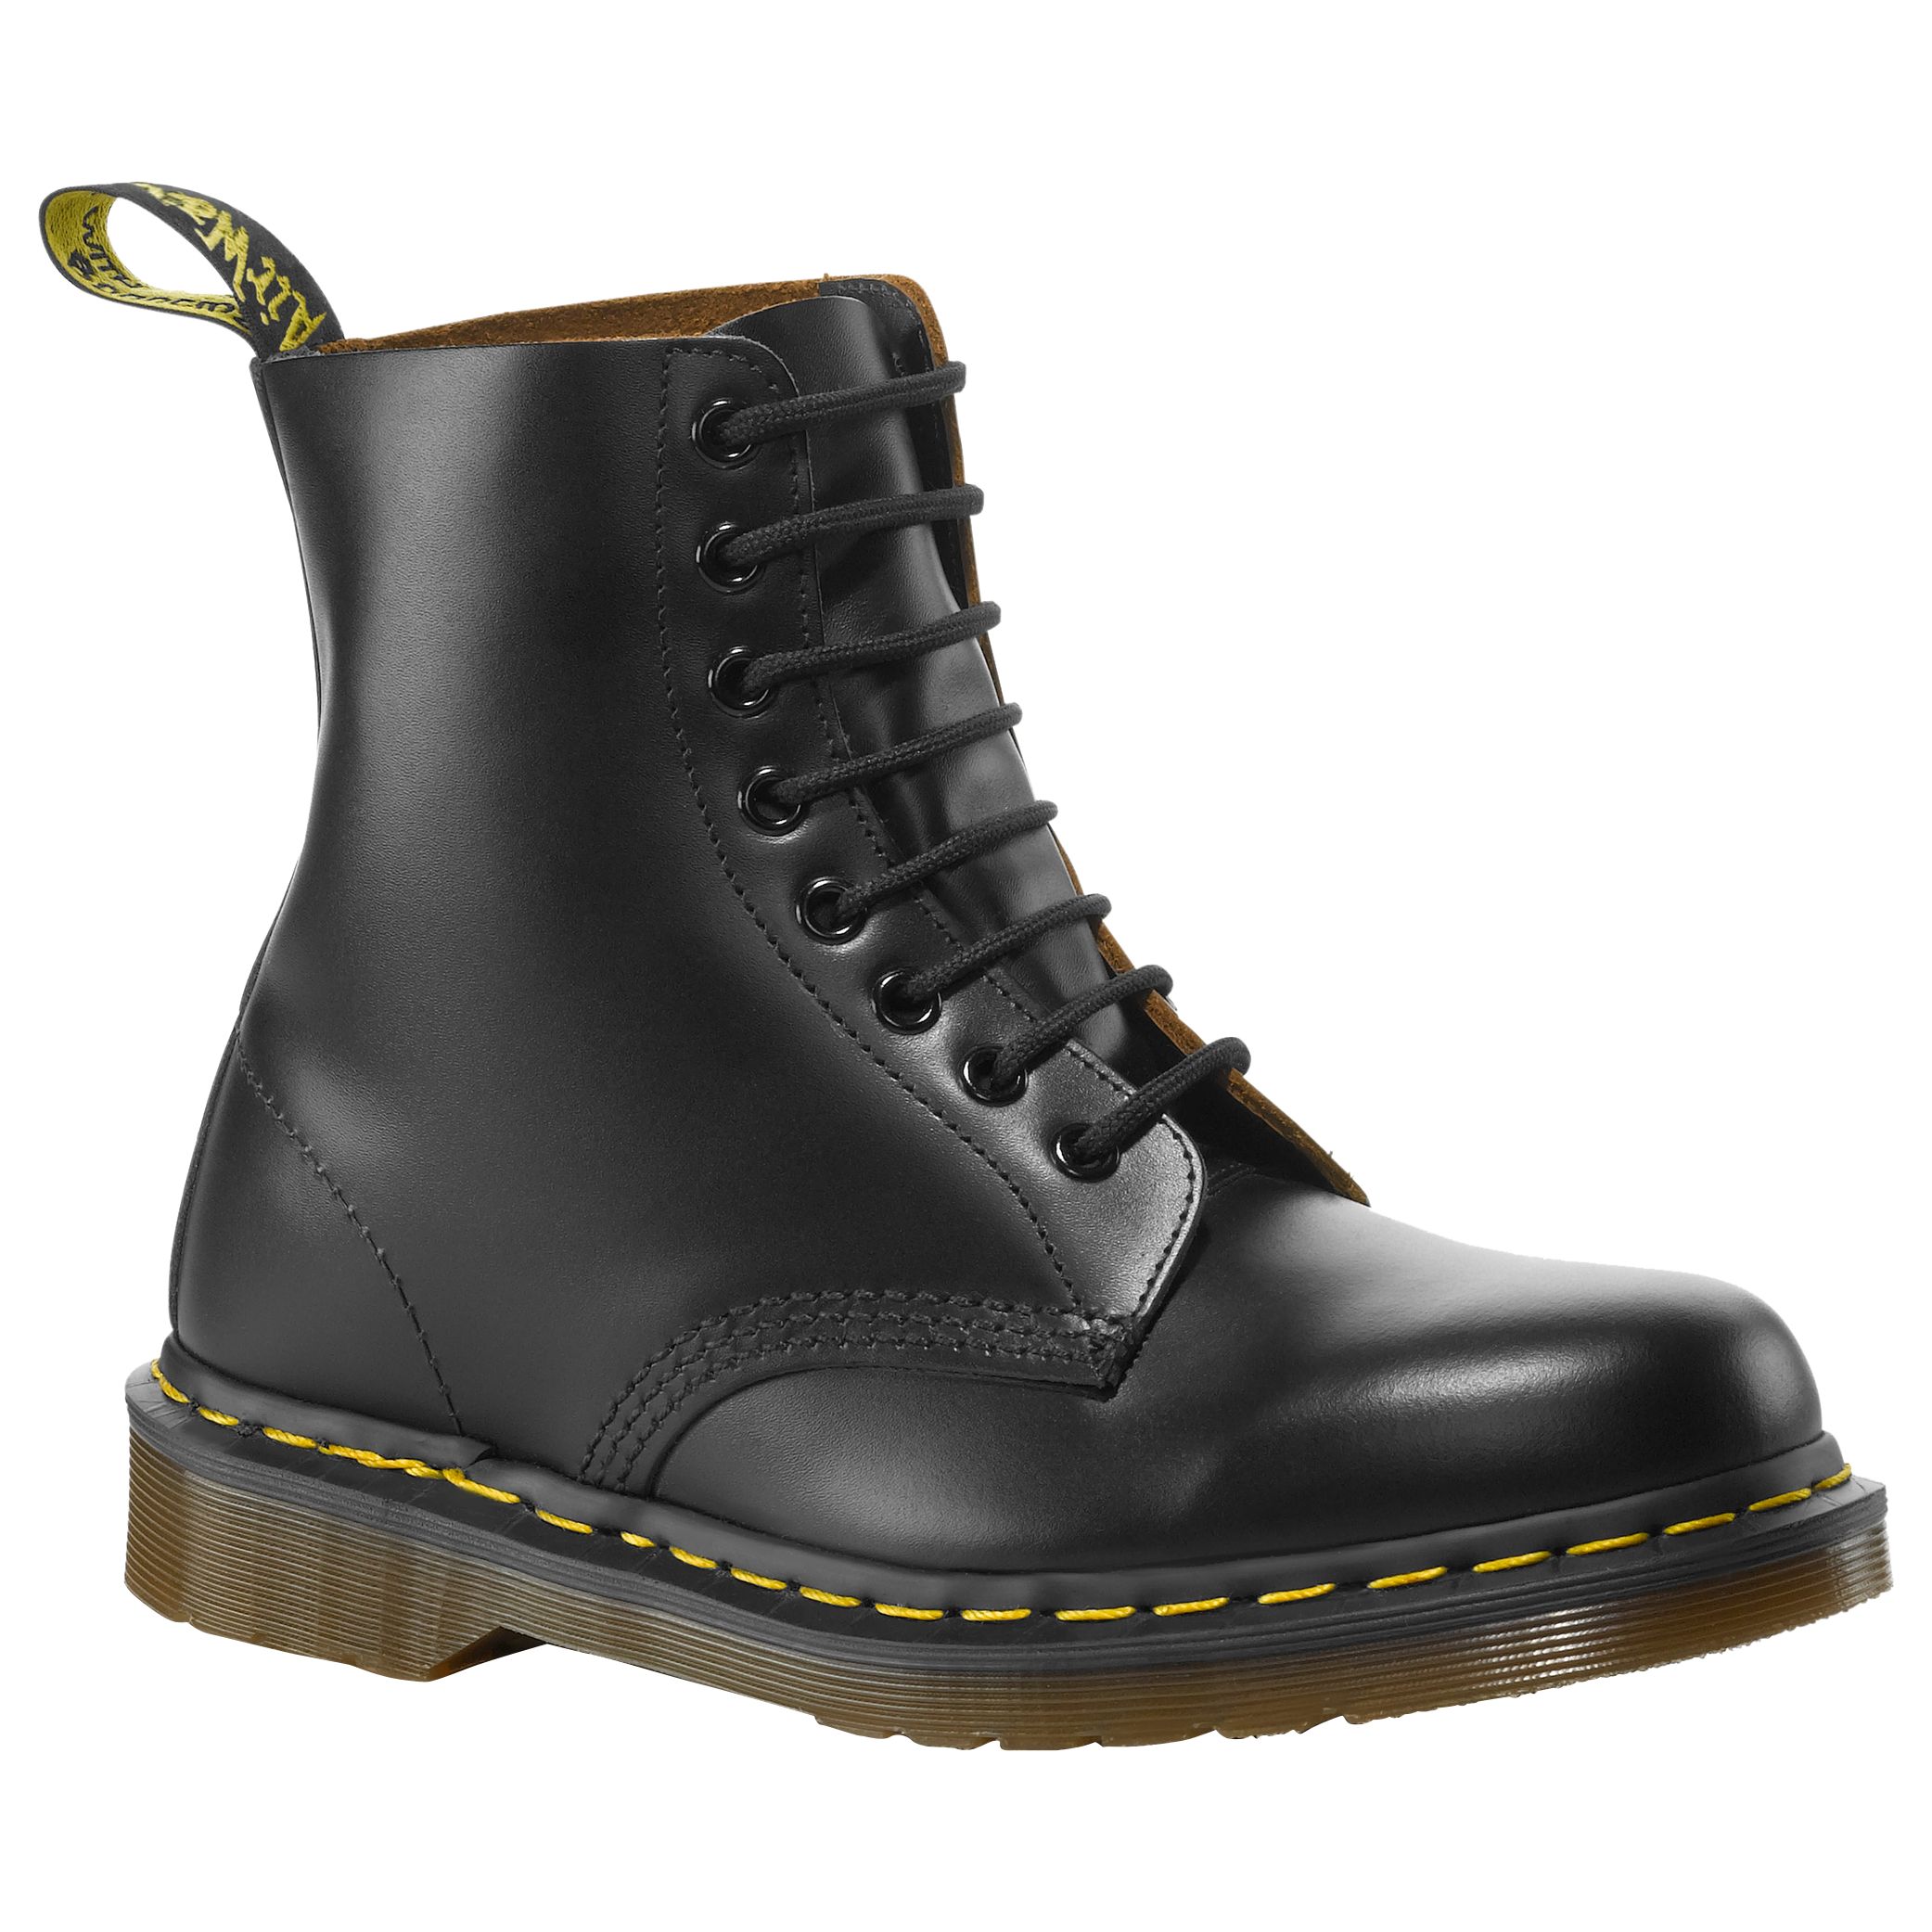 Dr Martens Made In England 1460 Vintage Lace Up Boots Black At John Lewis Partners